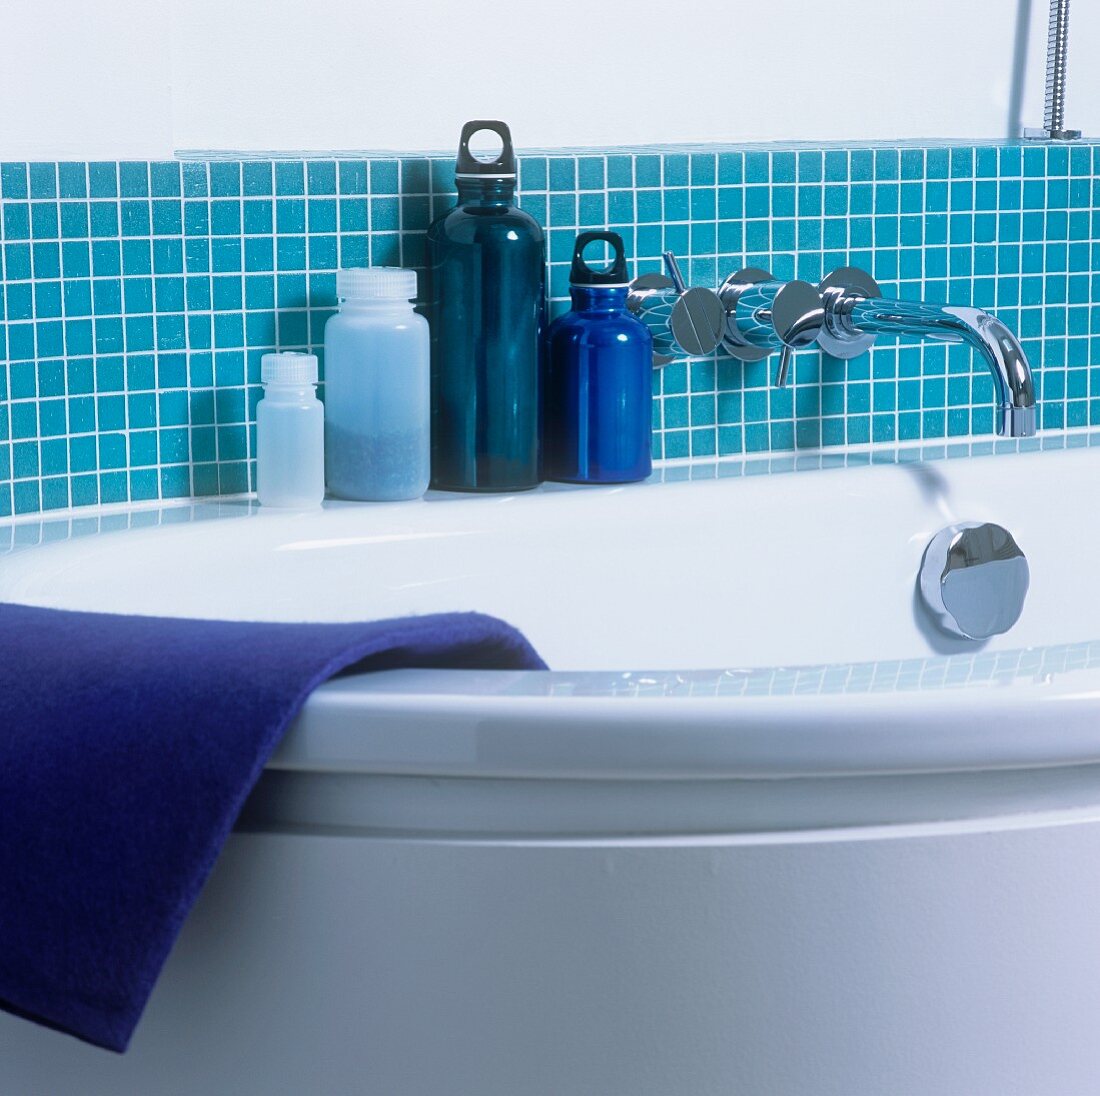 Detail of a bath tub with blue containers against blue wall tiles